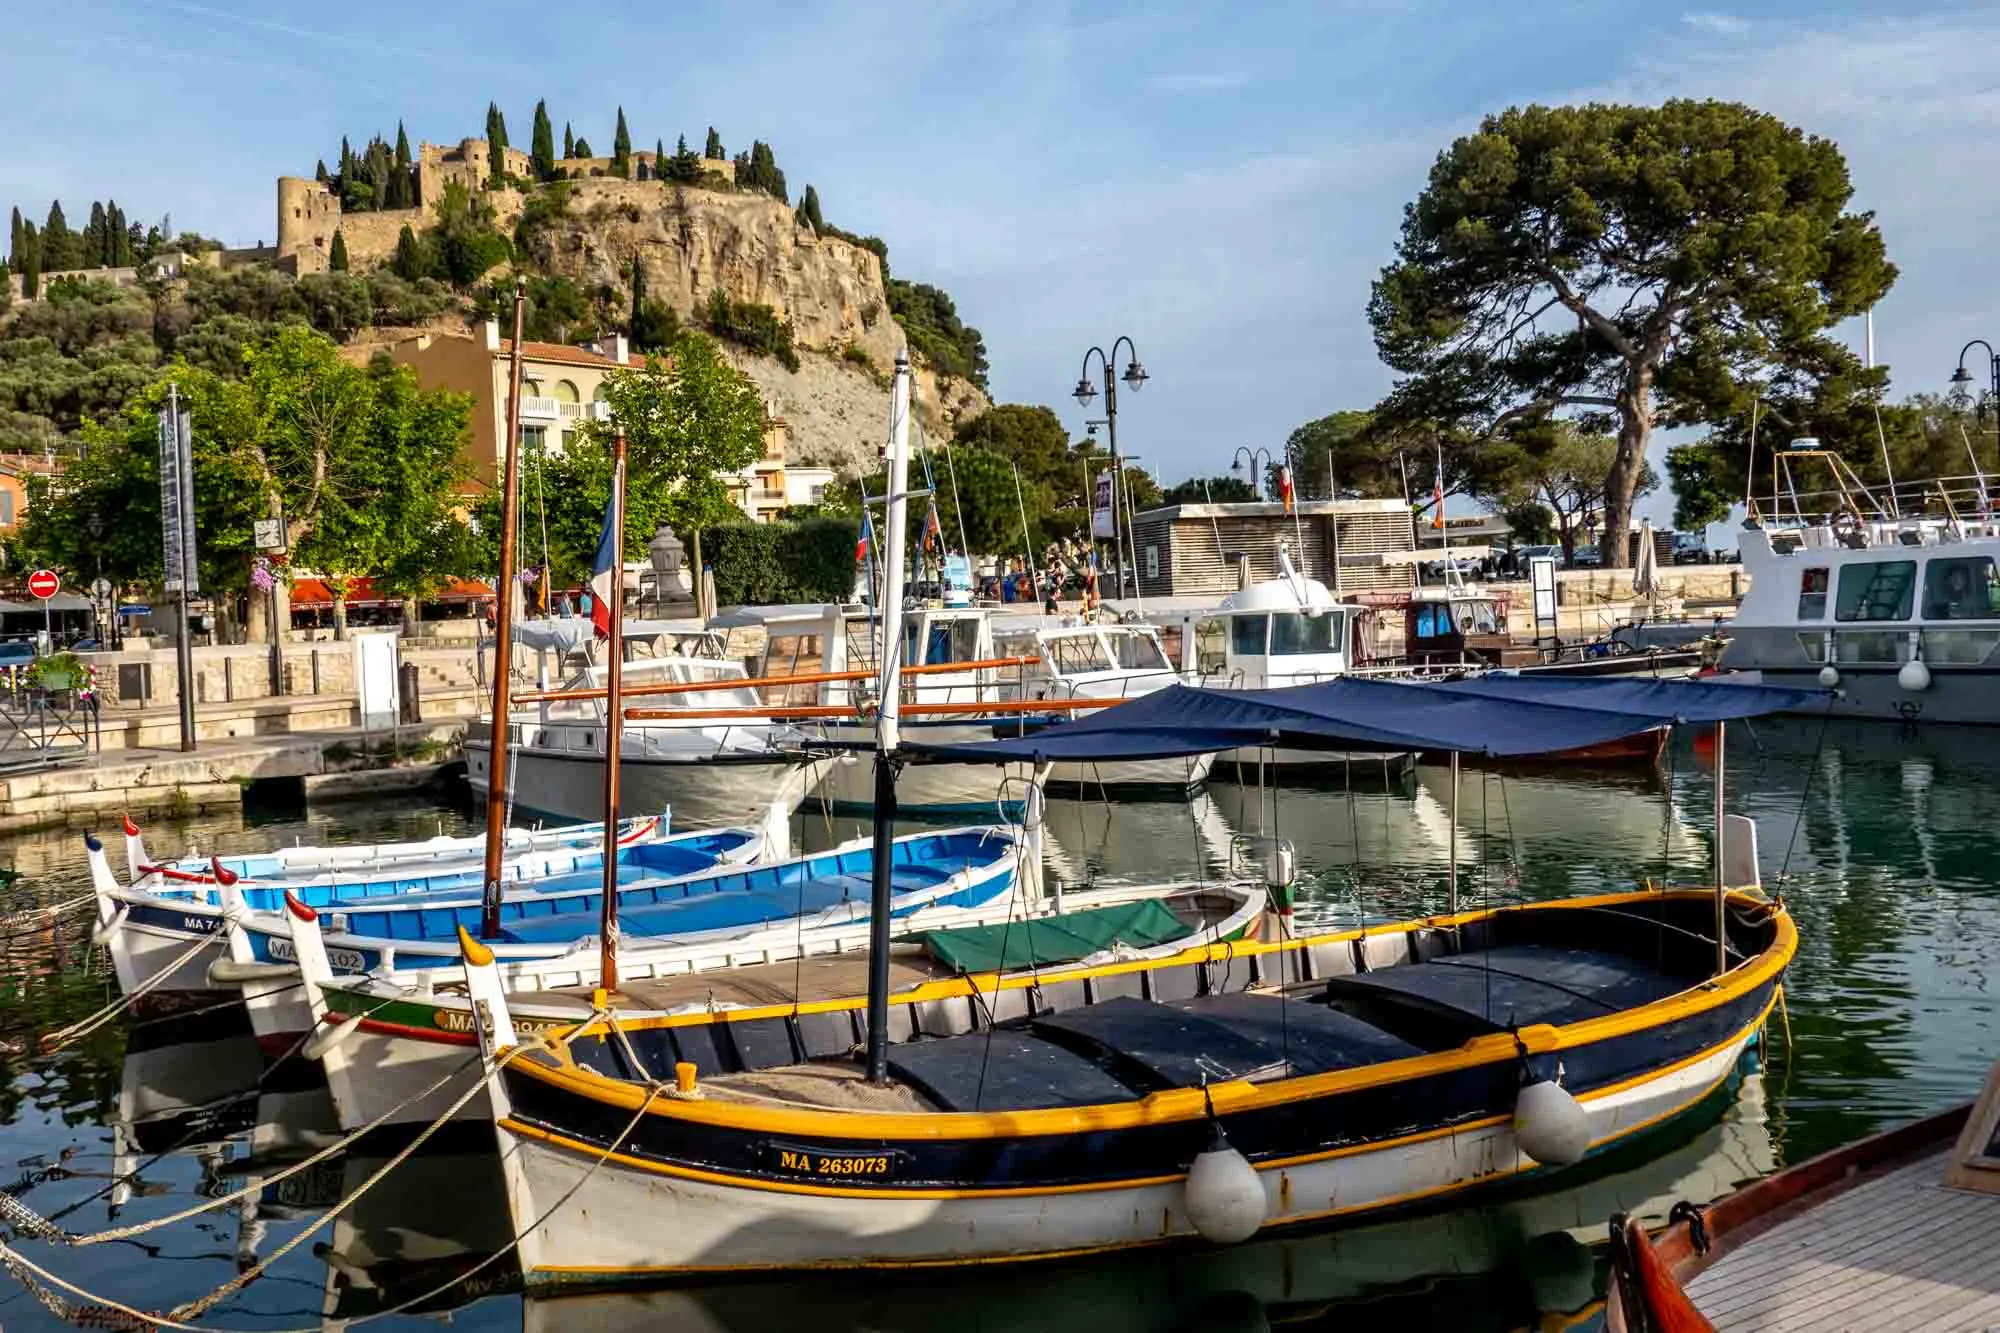 Colorful fishing boats in a marina with a hilltop building in the background